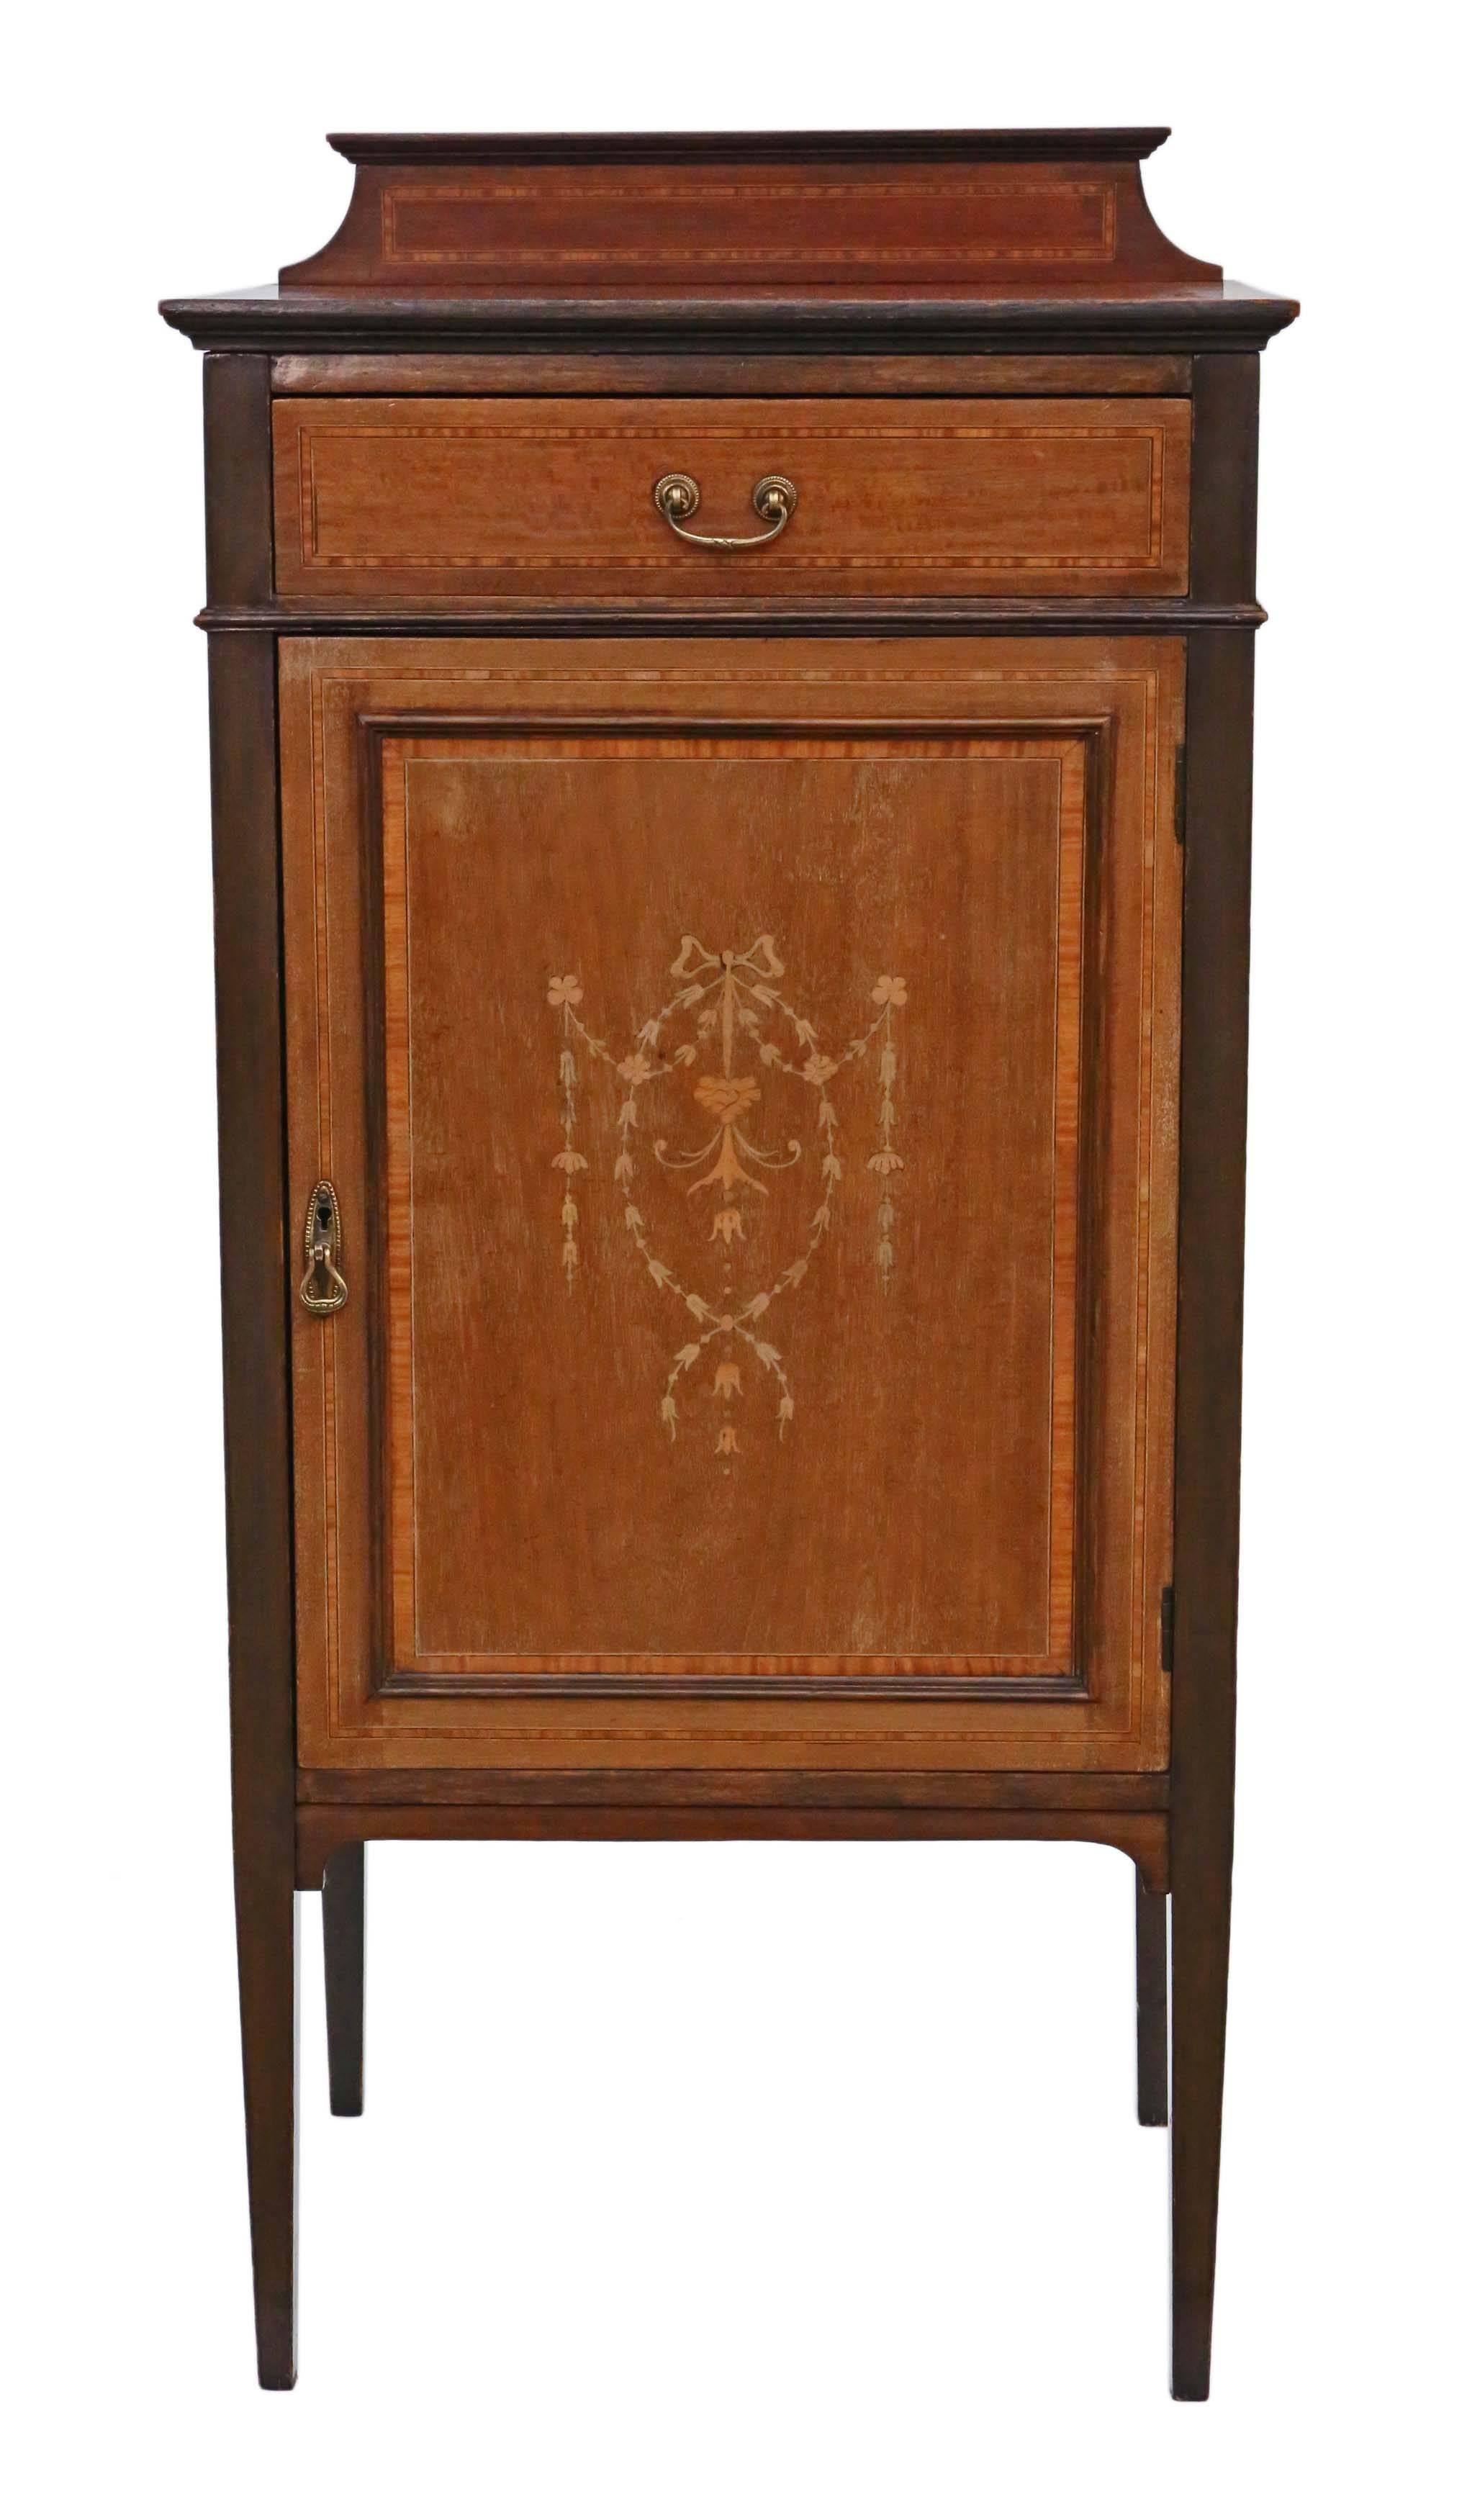 Antique quality Edwardian mahogany music or bedside cabinet. Labelled 'McEwen & Sons of Wick'

This is a fine quality presentation piece (presented on 26 December 1912). The mahogany lined drawer slides freely.

Solid, with no loose joints or